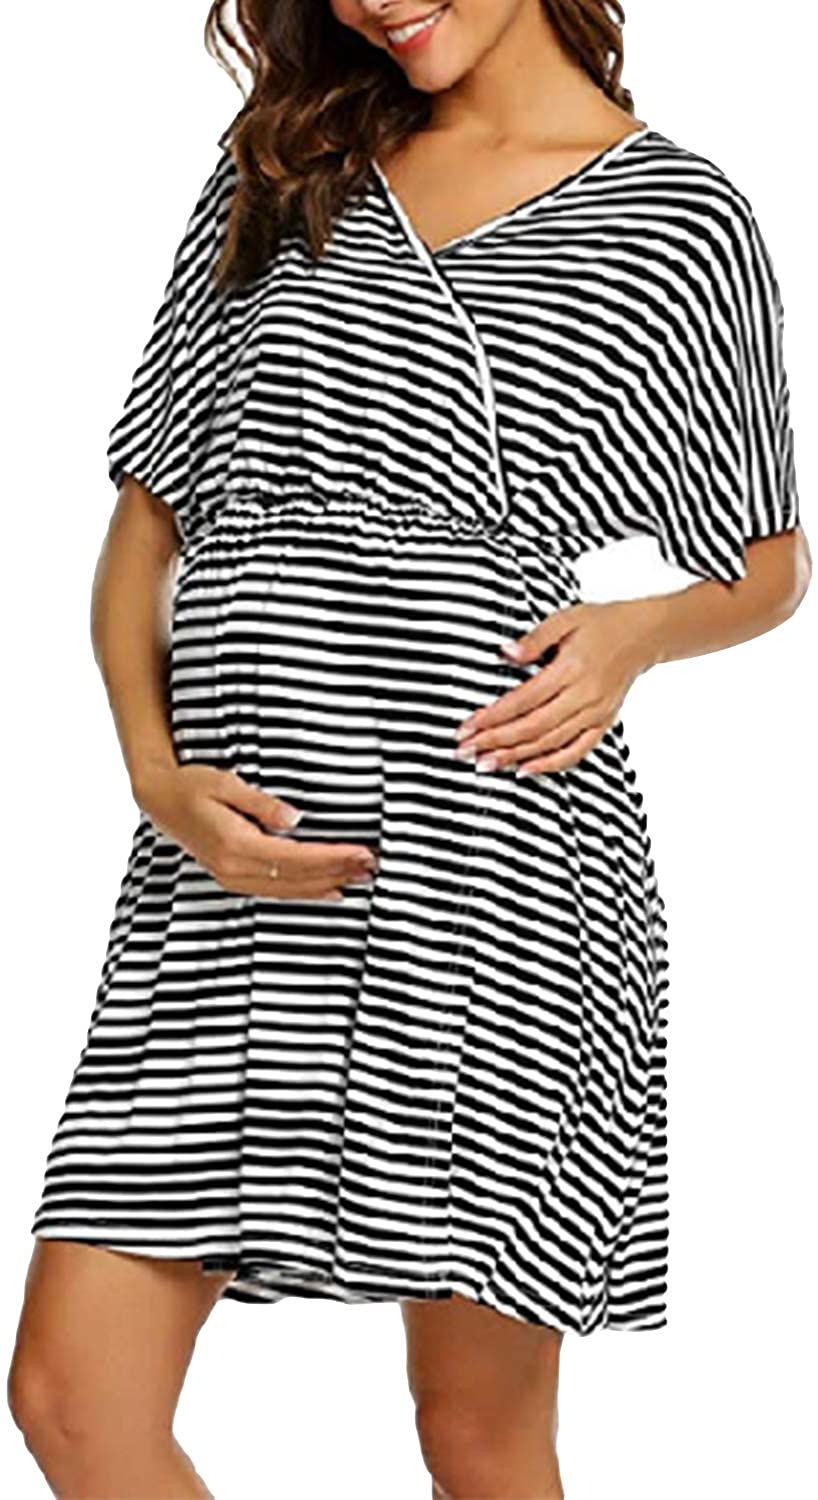 SUNNYME Women Maternity Dress Nursing Nightgown Summer Soft Labor and Delivery Gown V-Neck Sleepwear Pajama Dress 